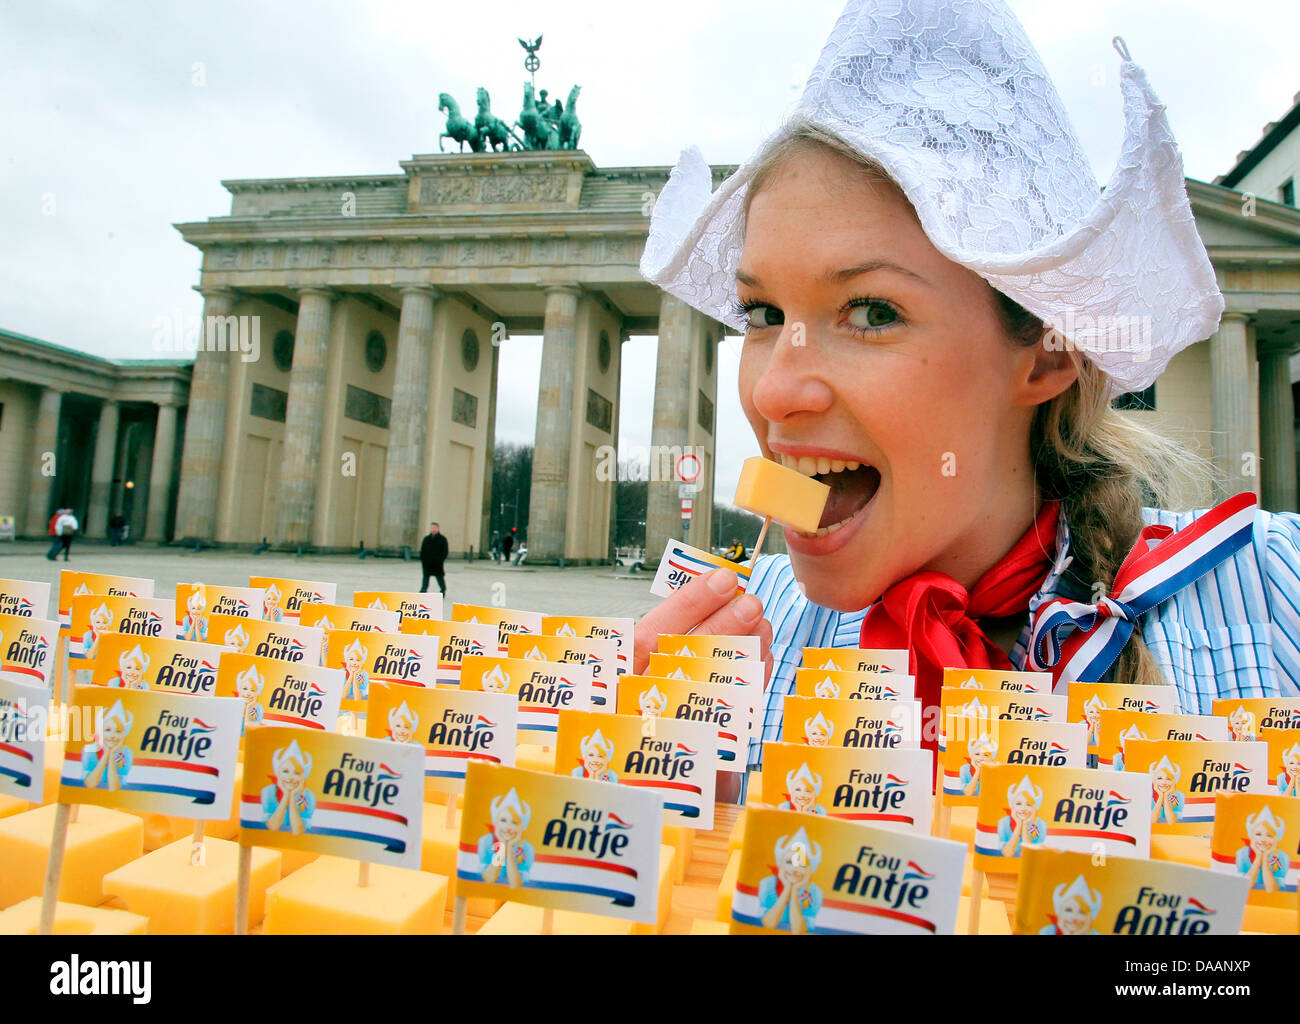 On the occasion of the world's biggest fair for food, agriculture and hortriculture, the International Green Week Berlin, Mandy Smits presents fresh Gouda at the Brandenburg Gate in Berlin, Germany, 20 January 2011. Ms Snits impersonates the advertising character 'Frau Antje', representing Dutch dairy. The Green Week last from 21 until 30. January 2011. Photo: WOLFGANG KUMM Stock Photo